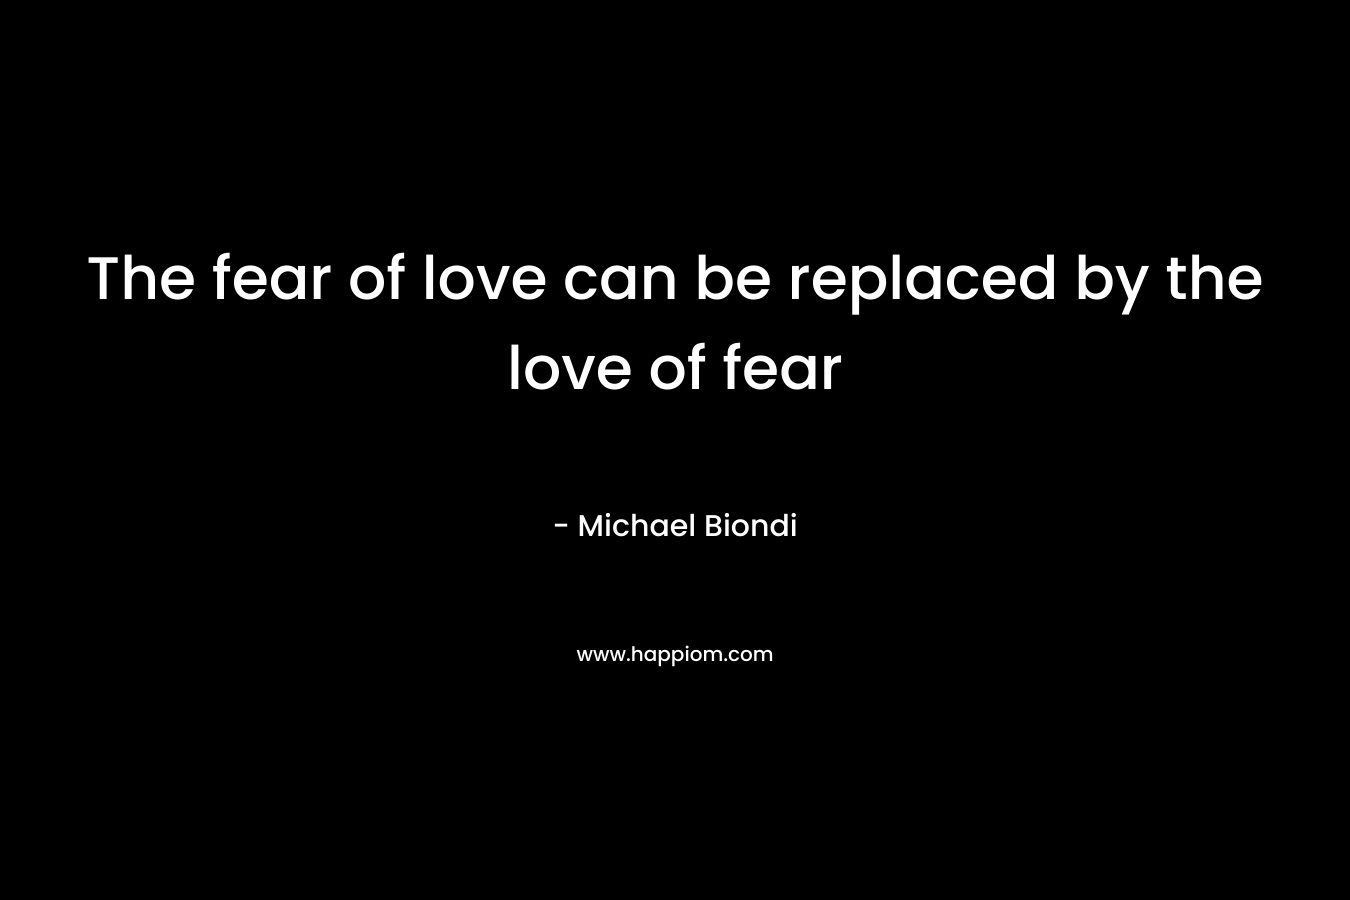 The fear of love can be replaced by the love of fear